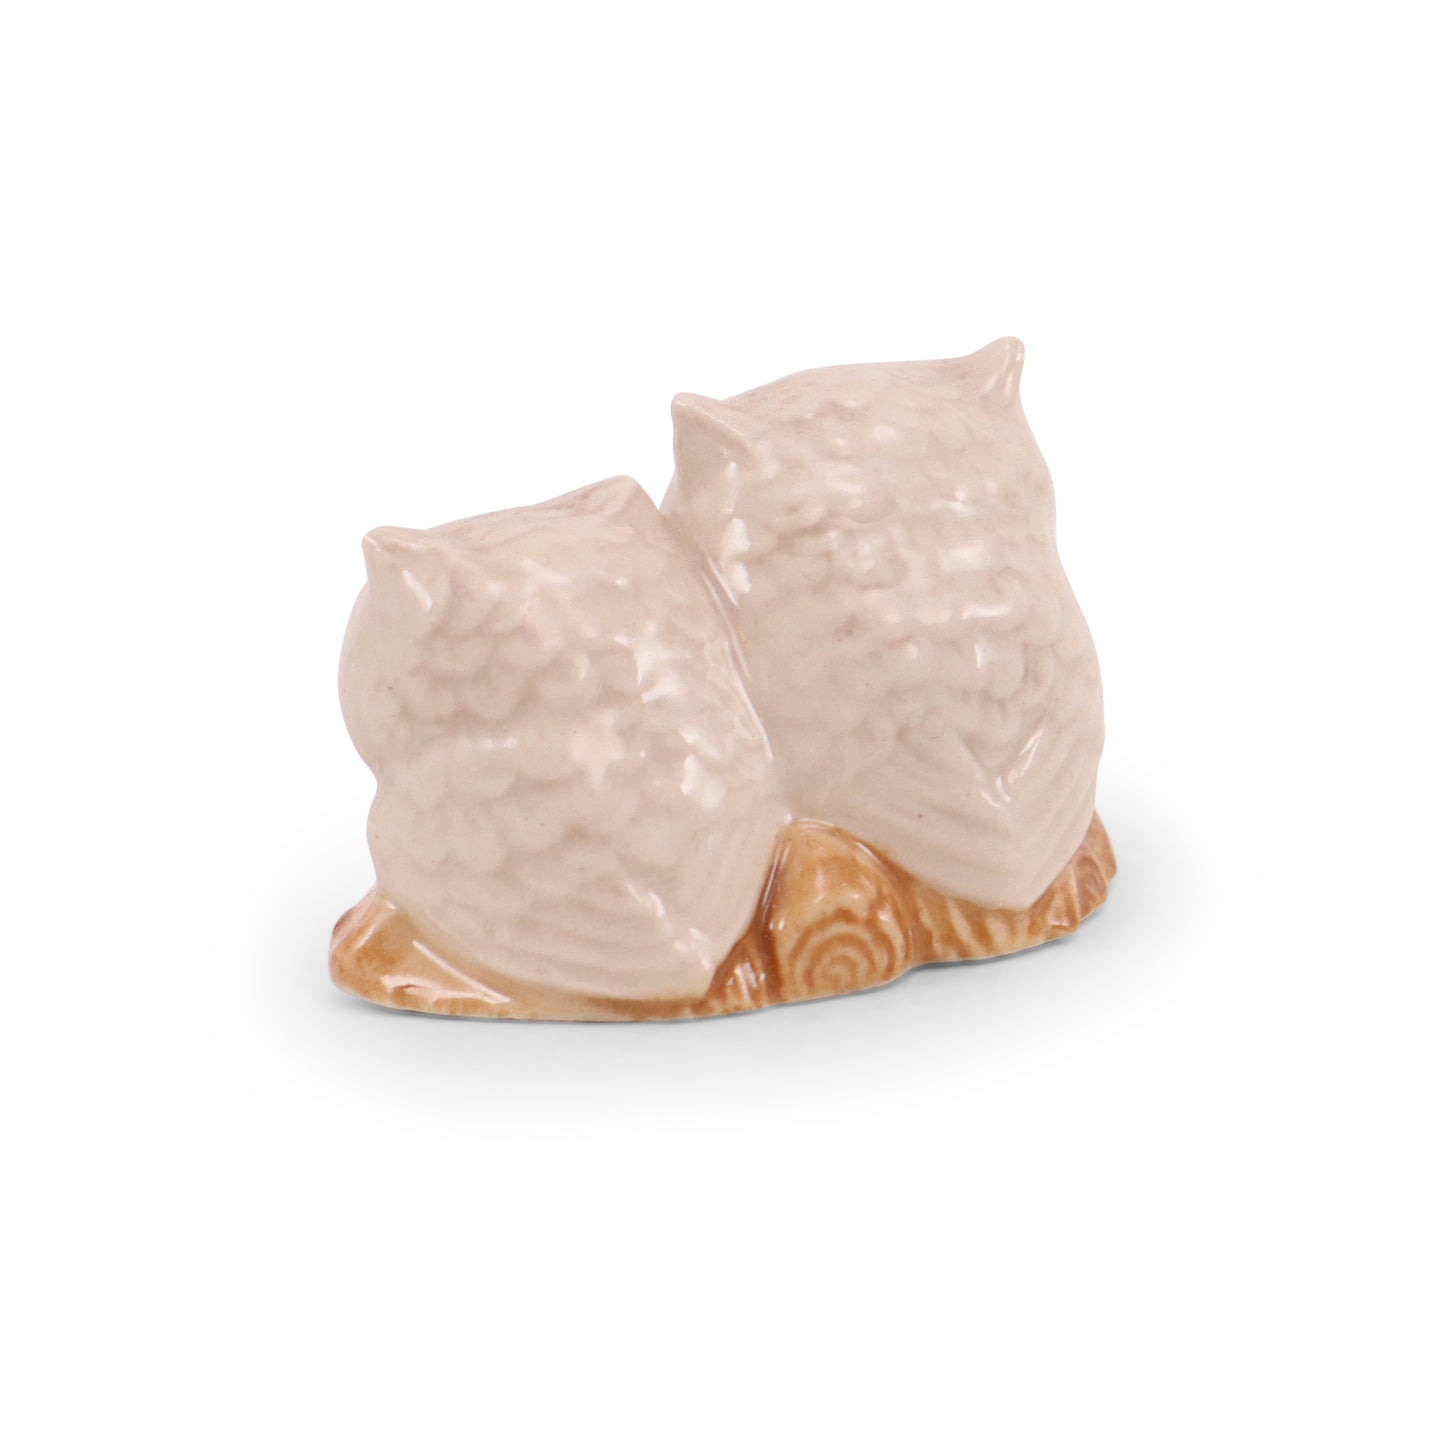 2"x1.5" Perched Owl Figurine. Pattern: Happy Couple